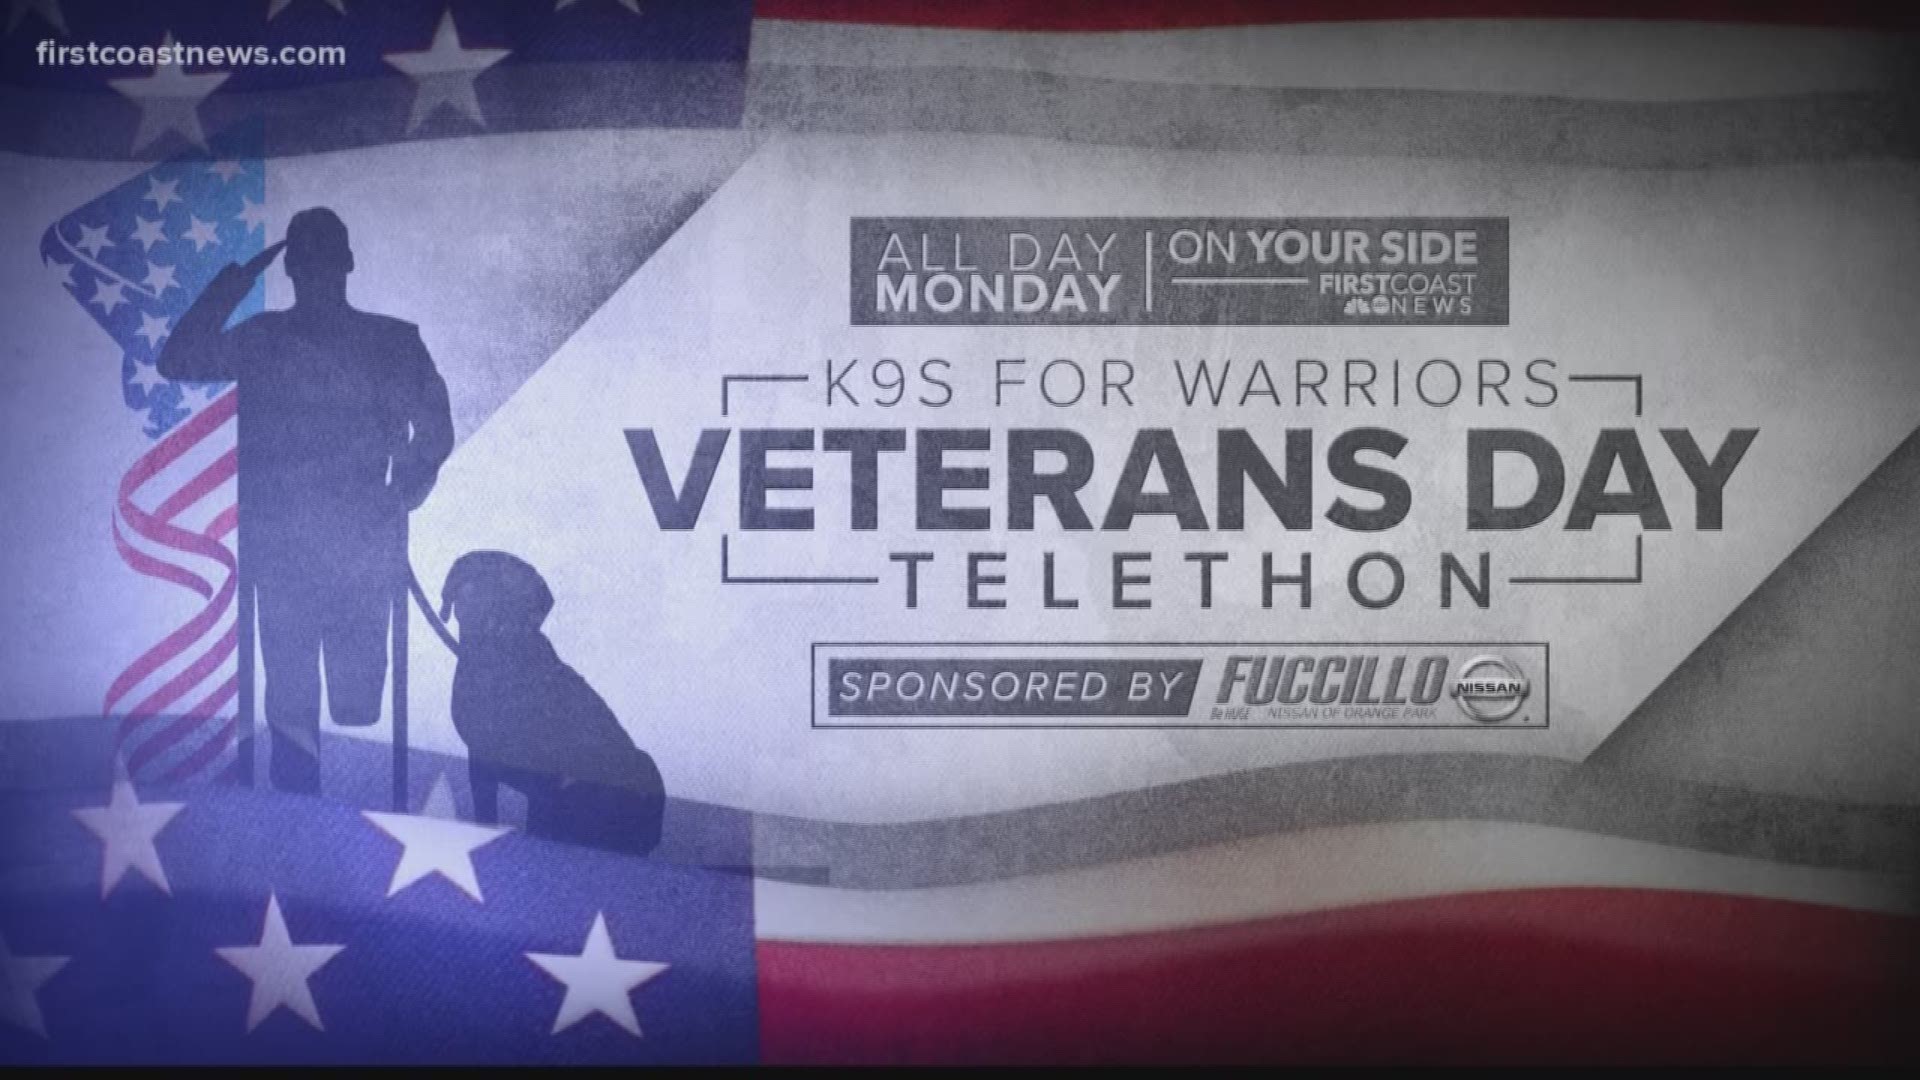 On Monday, Nov. 11, join us for our K9s for Warriors Telethon. K9s for Warriors has a 99% success rate in preventing suicides among veterans with PTSD.